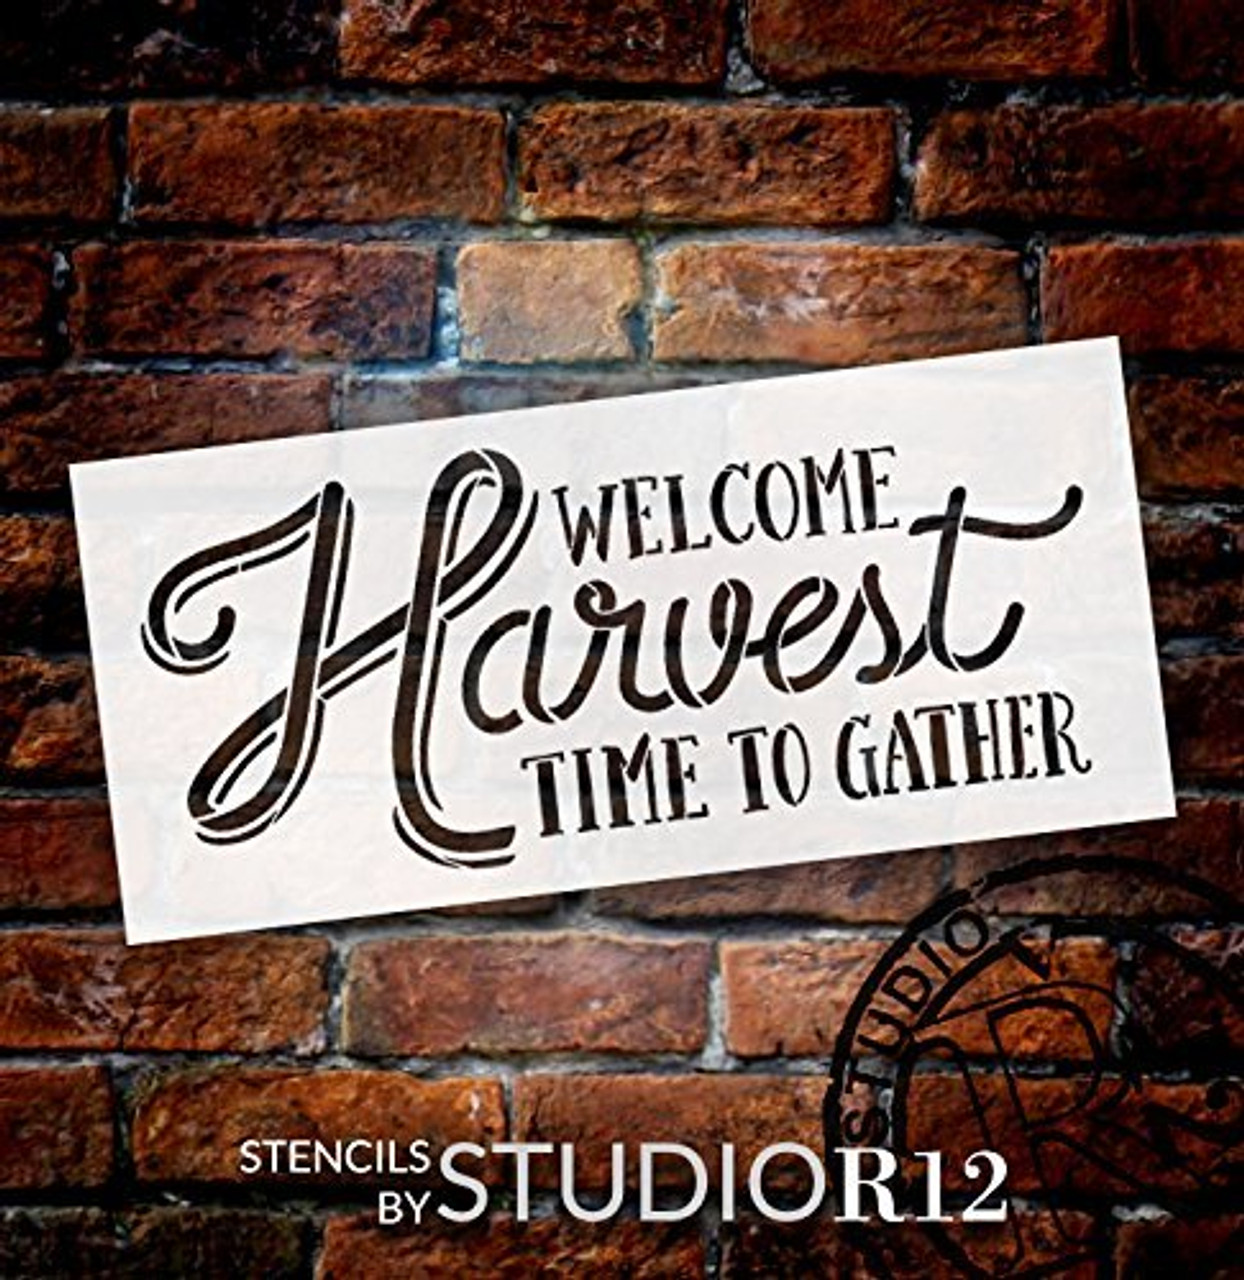 Welcome Harvest - Time to Gather Stencil by StudioR12 | Reusable Word Template for Painting on Wood | DIY Home Decor Thanksgiving Signs |Fall Autumn Inspiration | Mixed Media |Select Size